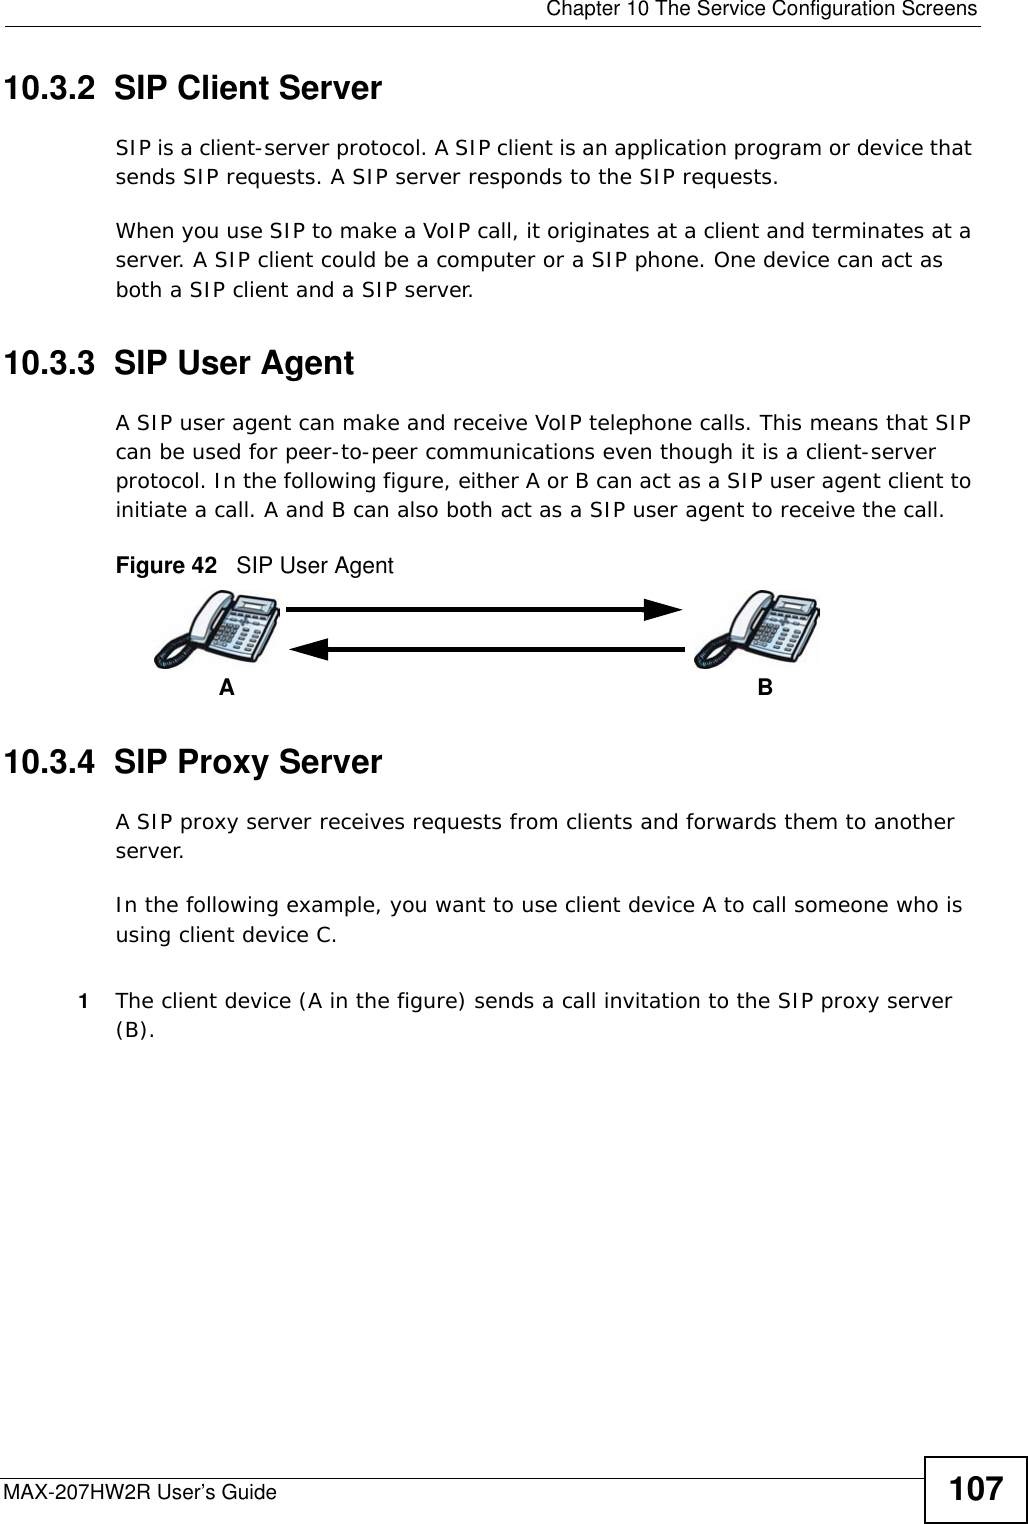  Chapter 10 The Service Configuration ScreensMAX-207HW2R User’s Guide 10710.3.2  SIP Client ServerSIP is a client-server protocol. A SIP client is an application program or device that sends SIP requests. A SIP server responds to the SIP requests. When you use SIP to make a VoIP call, it originates at a client and terminates at a server. A SIP client could be a computer or a SIP phone. One device can act as both a SIP client and a SIP server. 10.3.3  SIP User Agent A SIP user agent can make and receive VoIP telephone calls. This means that SIP can be used for peer-to-peer communications even though it is a client-server protocol. In the following figure, either A or B can act as a SIP user agent client to initiate a call. A and B can also both act as a SIP user agent to receive the call.Figure 42   SIP User Agent10.3.4  SIP Proxy ServerA SIP proxy server receives requests from clients and forwards them to another server.In the following example, you want to use client device A to call someone who is using client device C. 1The client device (A in the figure) sends a call invitation to the SIP proxy server (B).AB